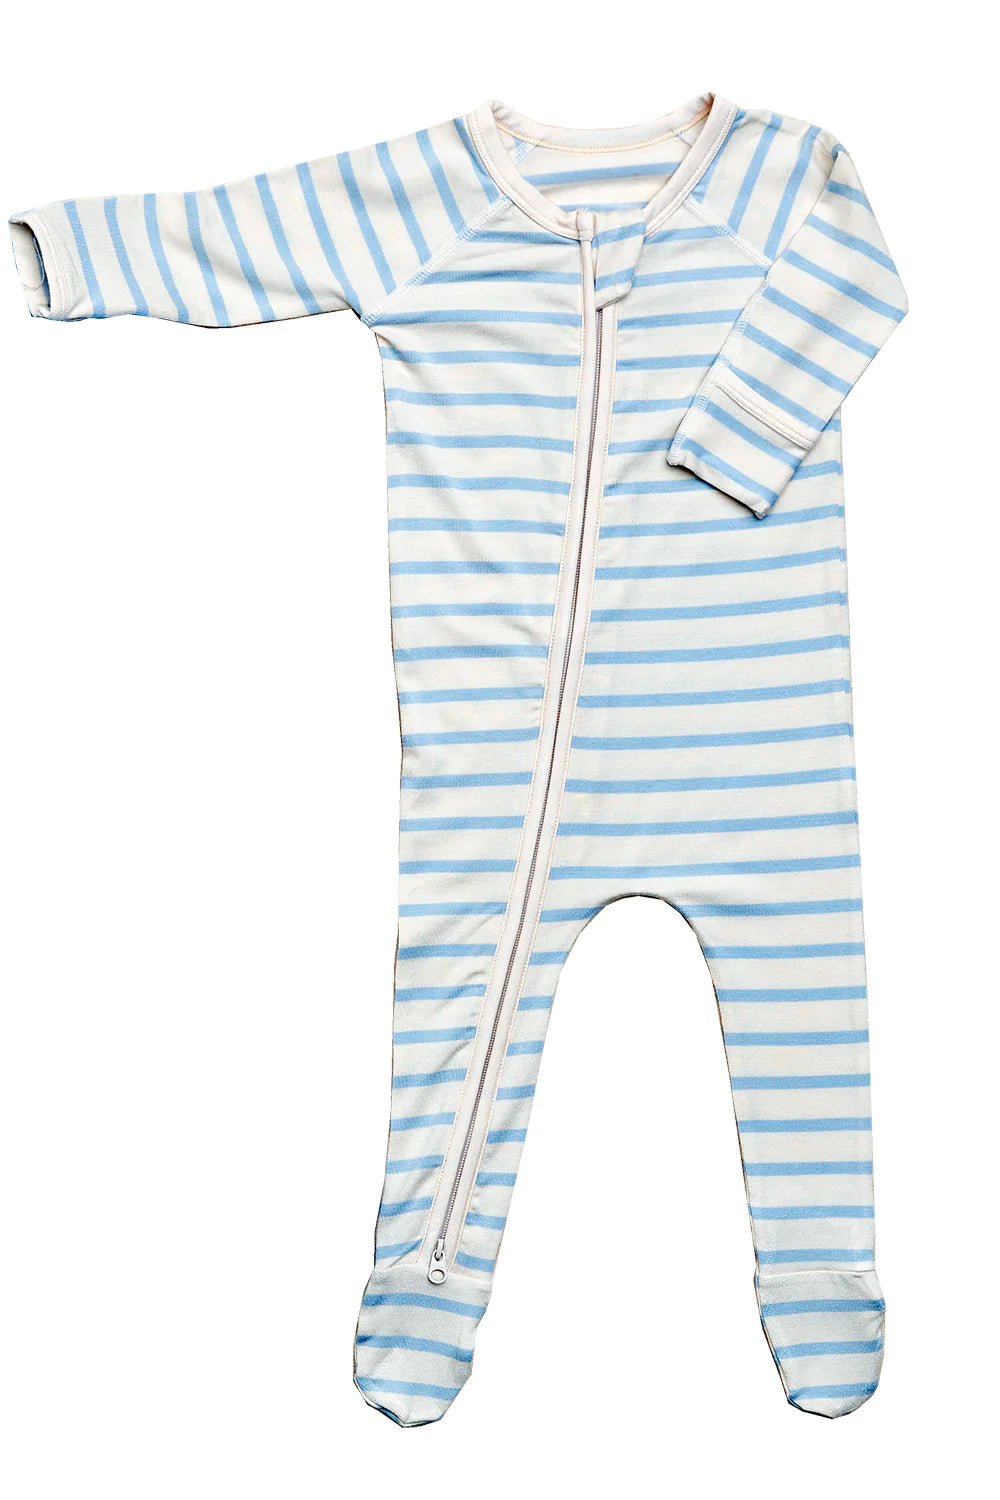 Boody - Long Sleeve Onesie with Two Way Zipper